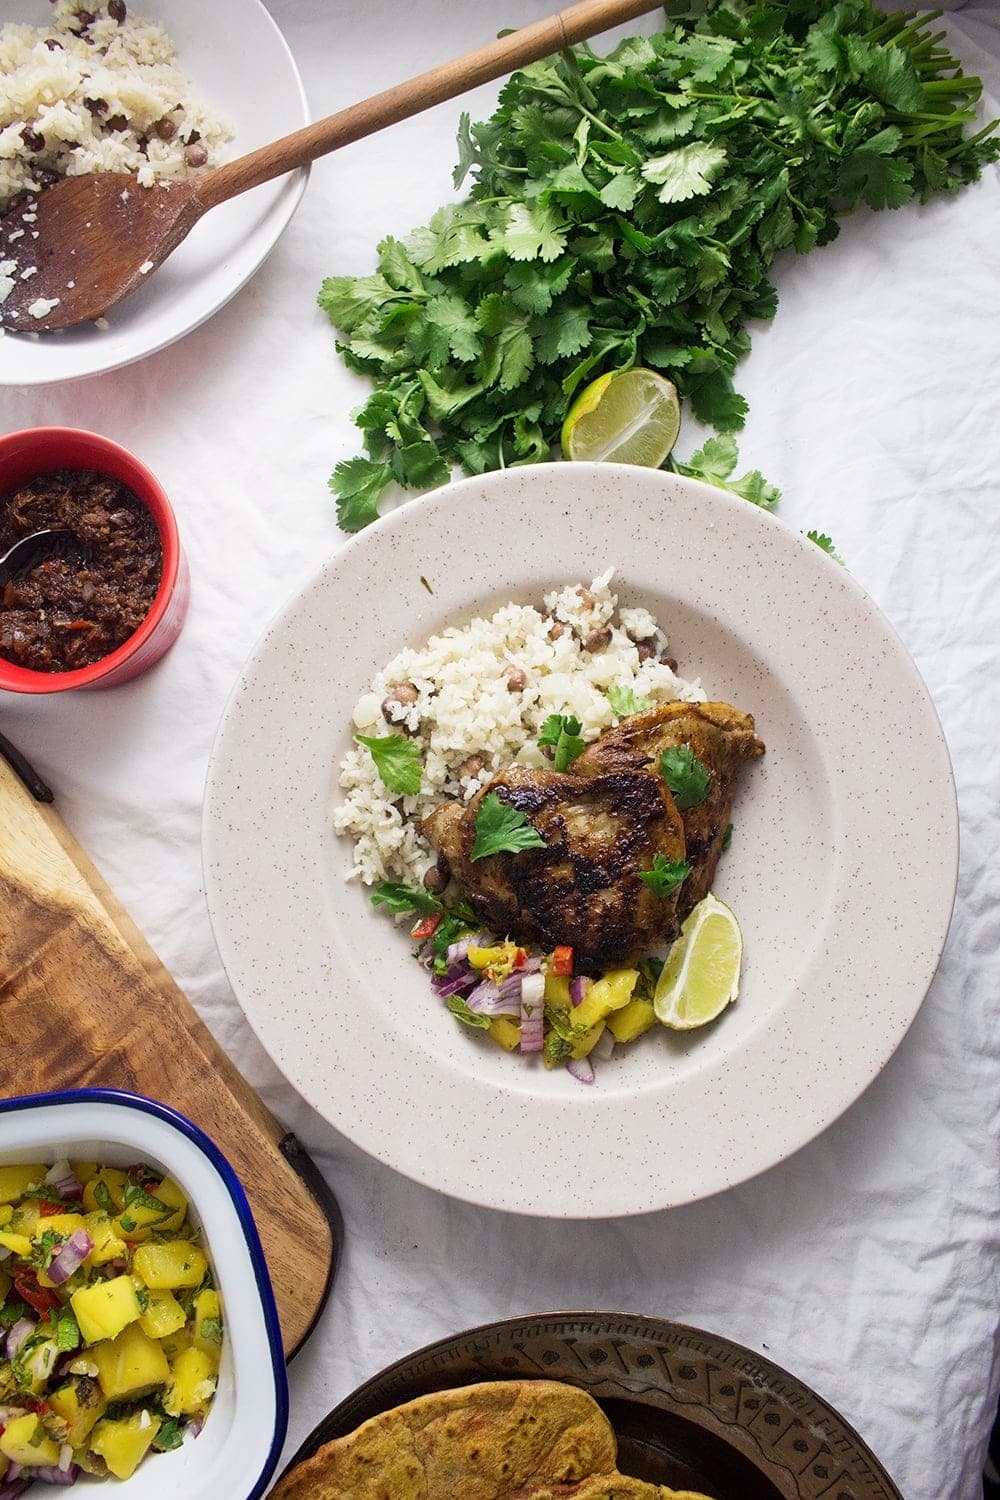 This jerk chicken is sweet and spicy, it tastes amazing served with a mango salsa and turmeric roti. Rice & peas is the perfect base for all this deliciousness!